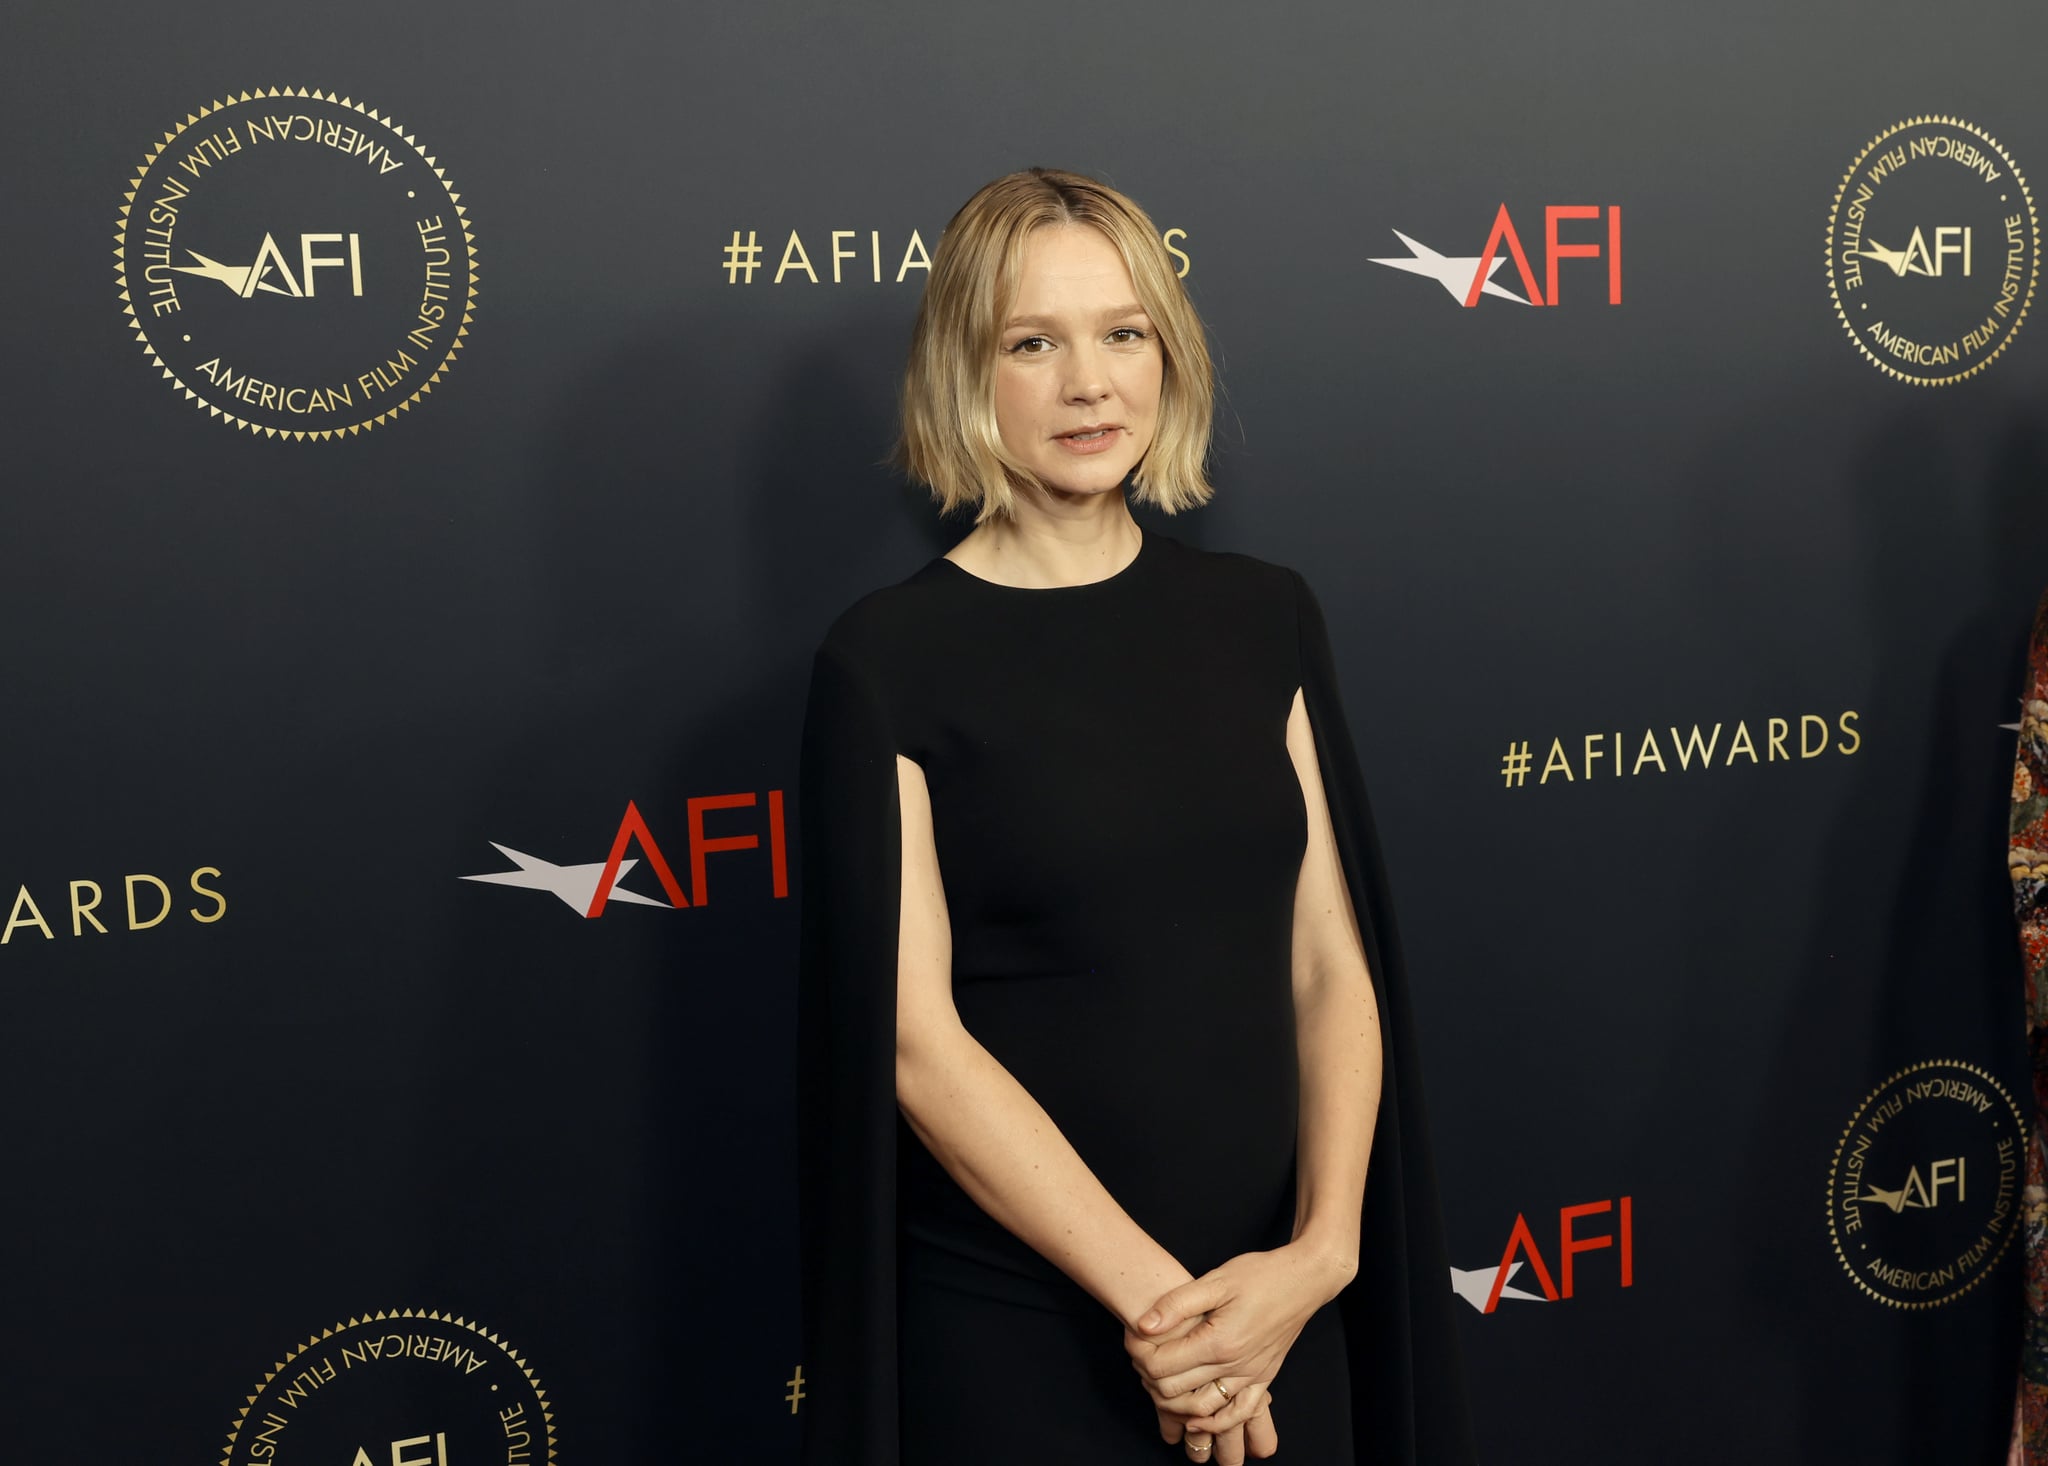 LOS ANGELES, CALIFORNIA - JANUARY 13: Carey Mulligan attends the AFI Awards Luncheon at Four Seasons Hotel Los Angeles at Beverly Hills on January 13, 2023 in Los Angeles, California. (Photo by Kevin Winter/Getty Images)